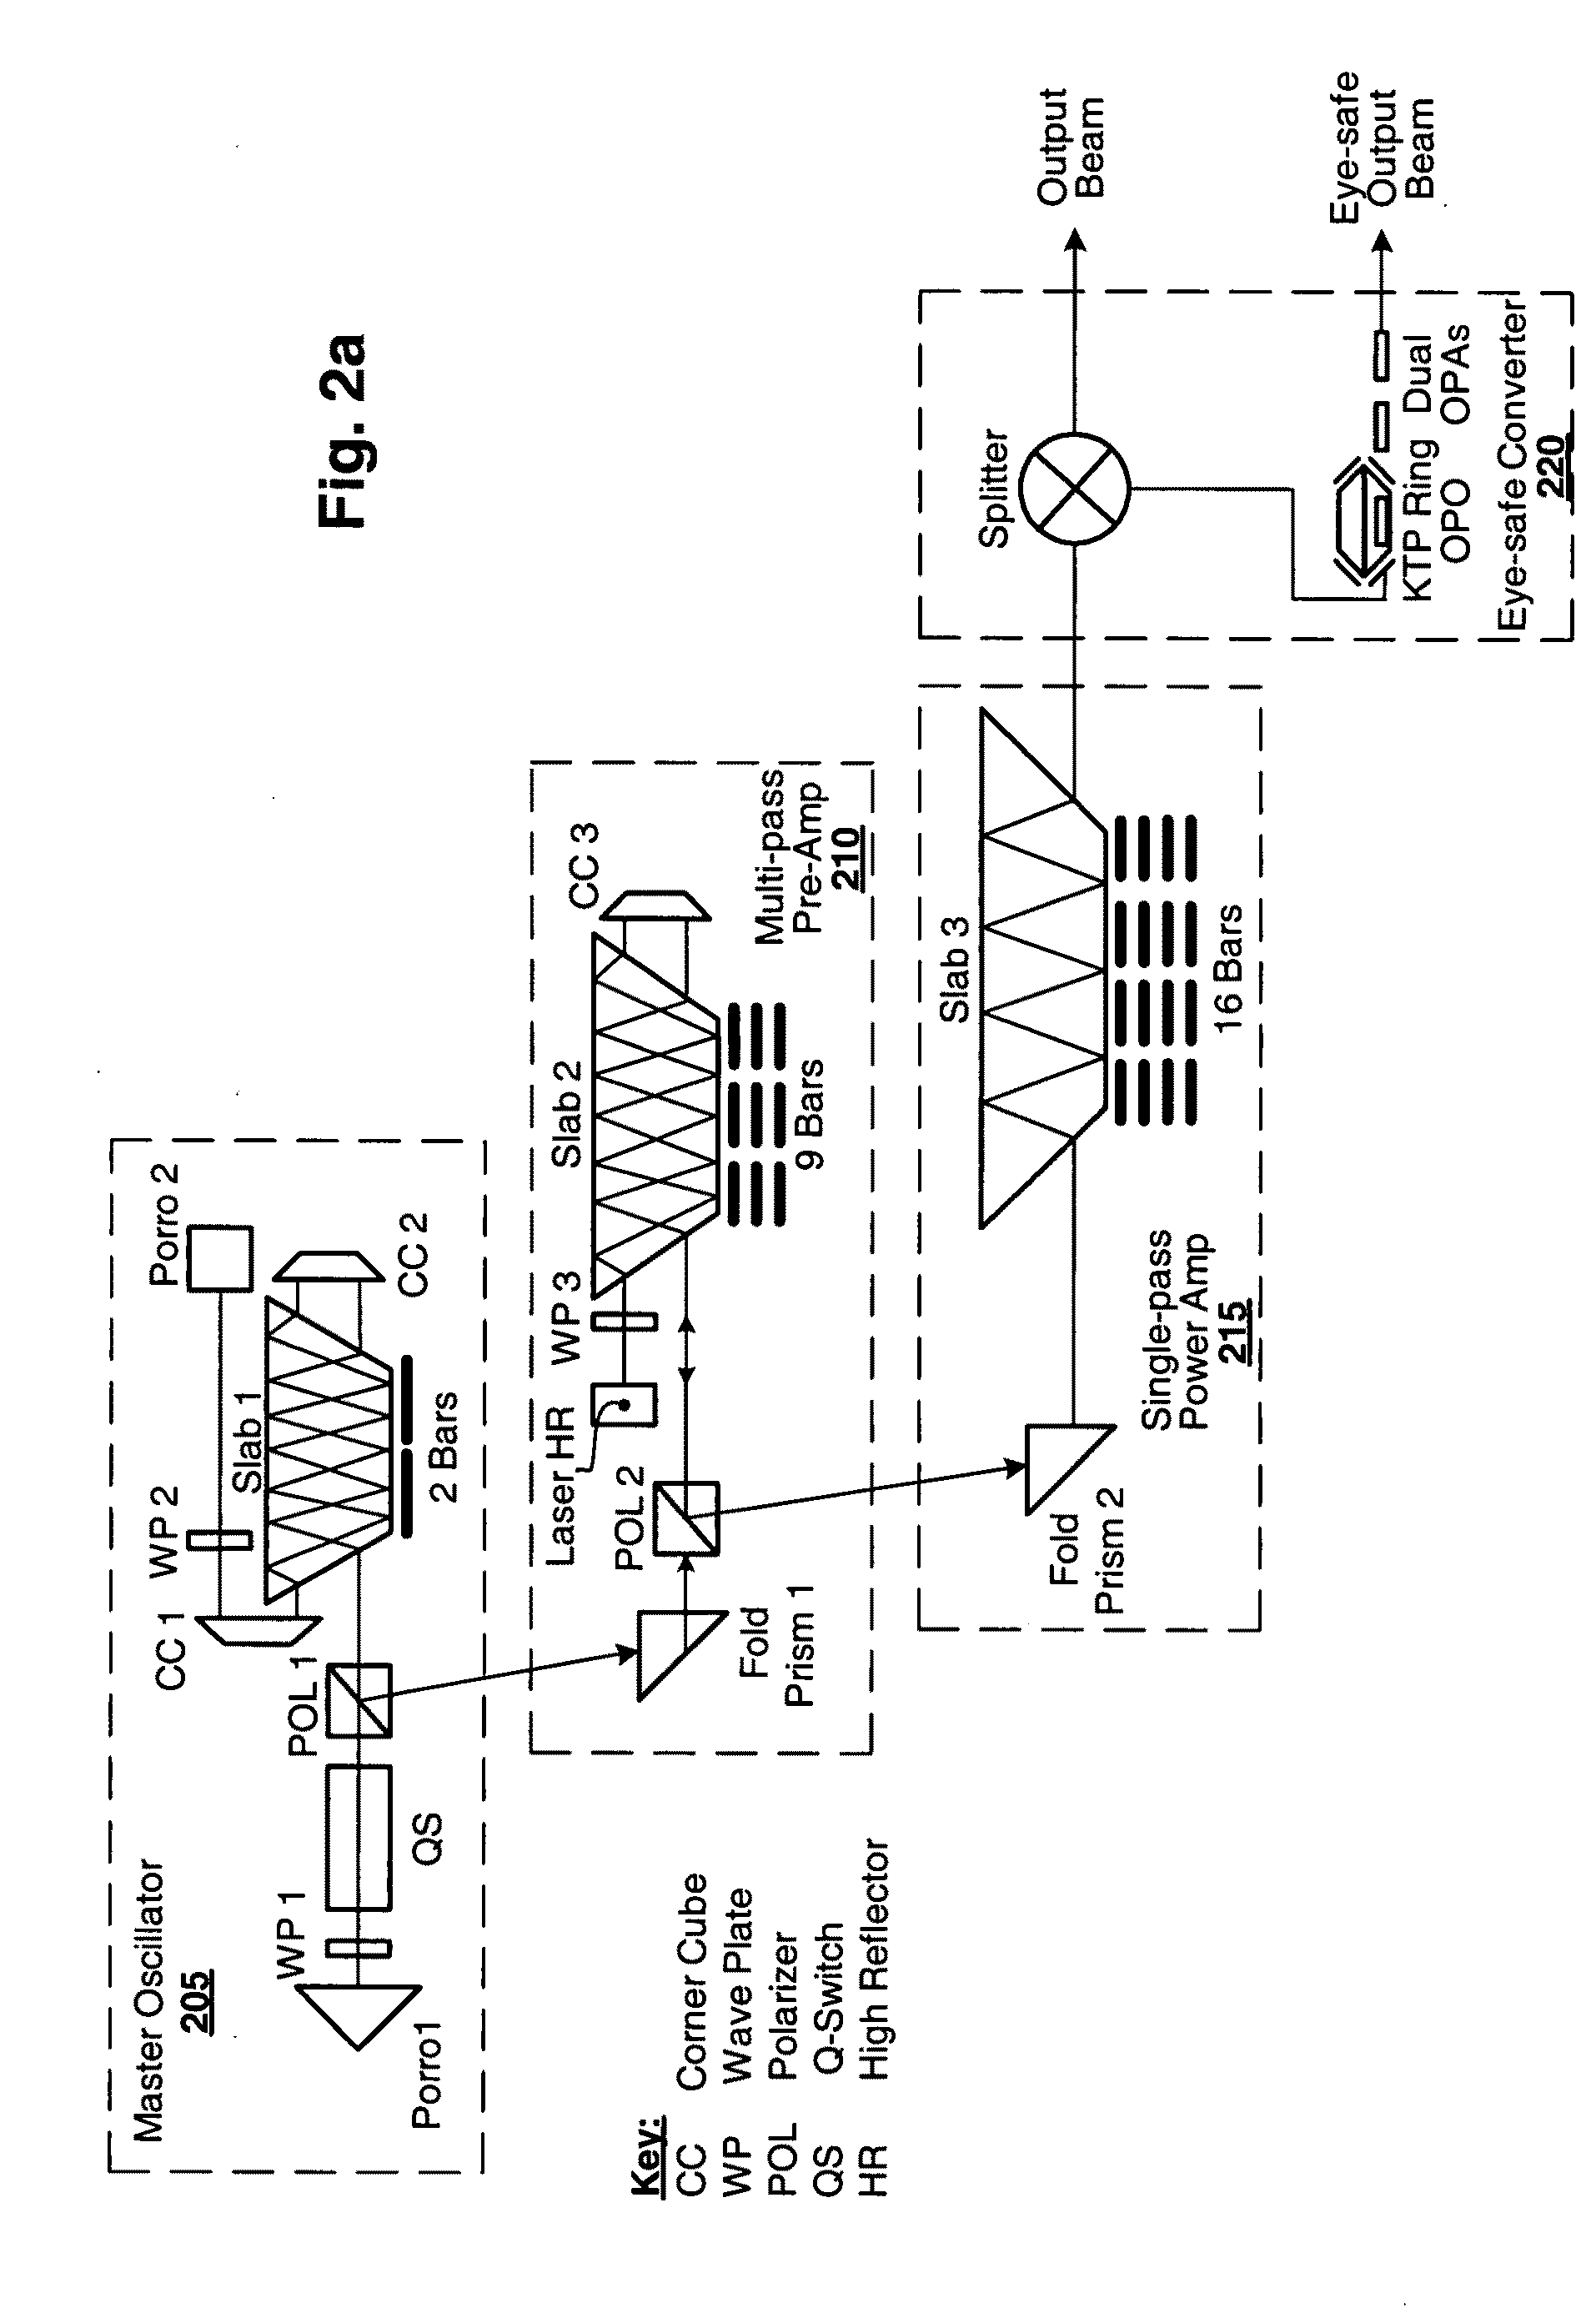 Multi-pass laser amplifier with staged gain mediums of varied absorption length